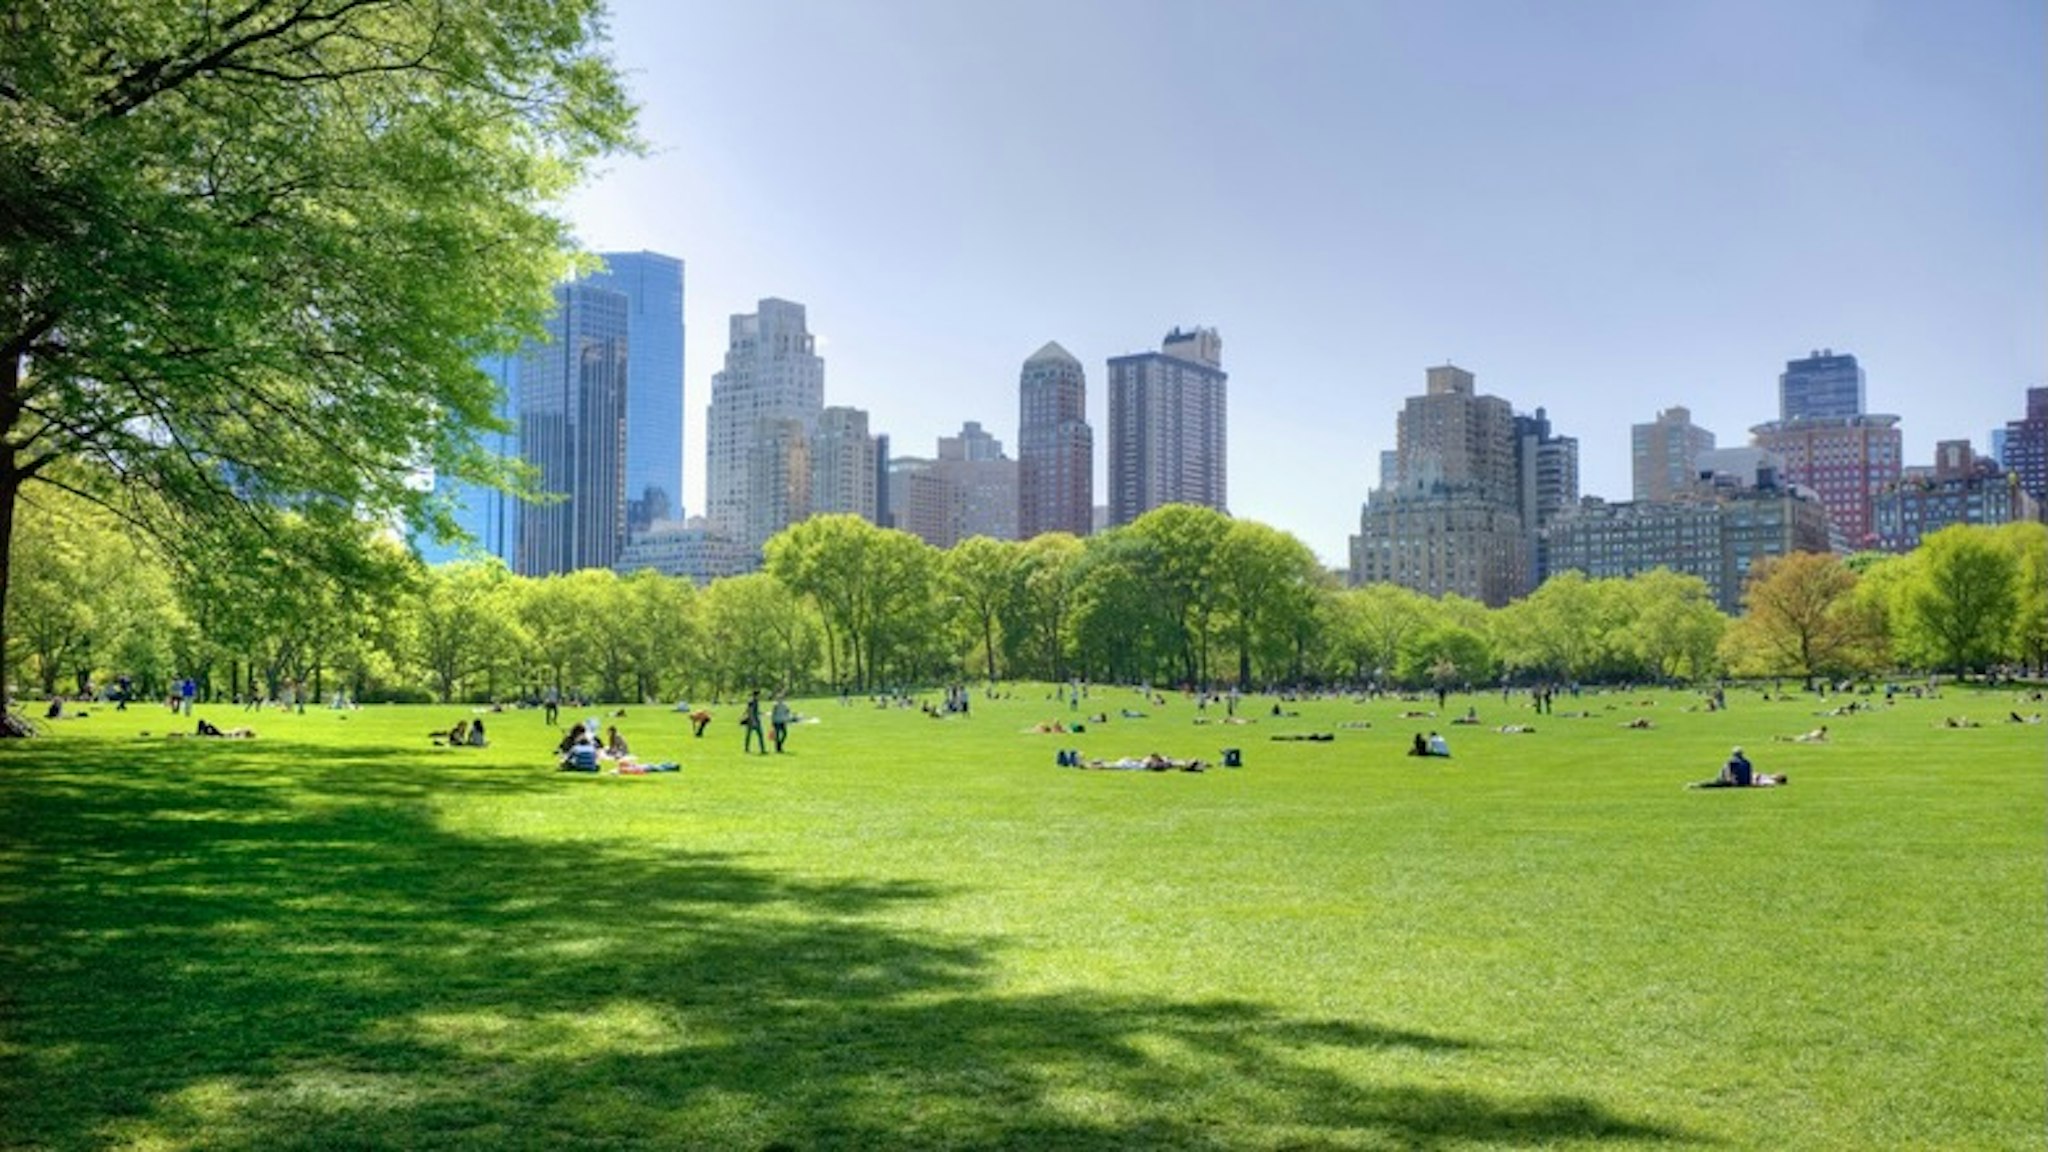 Great lawn in Central Park - stock photo Tetra Images via Getty Images